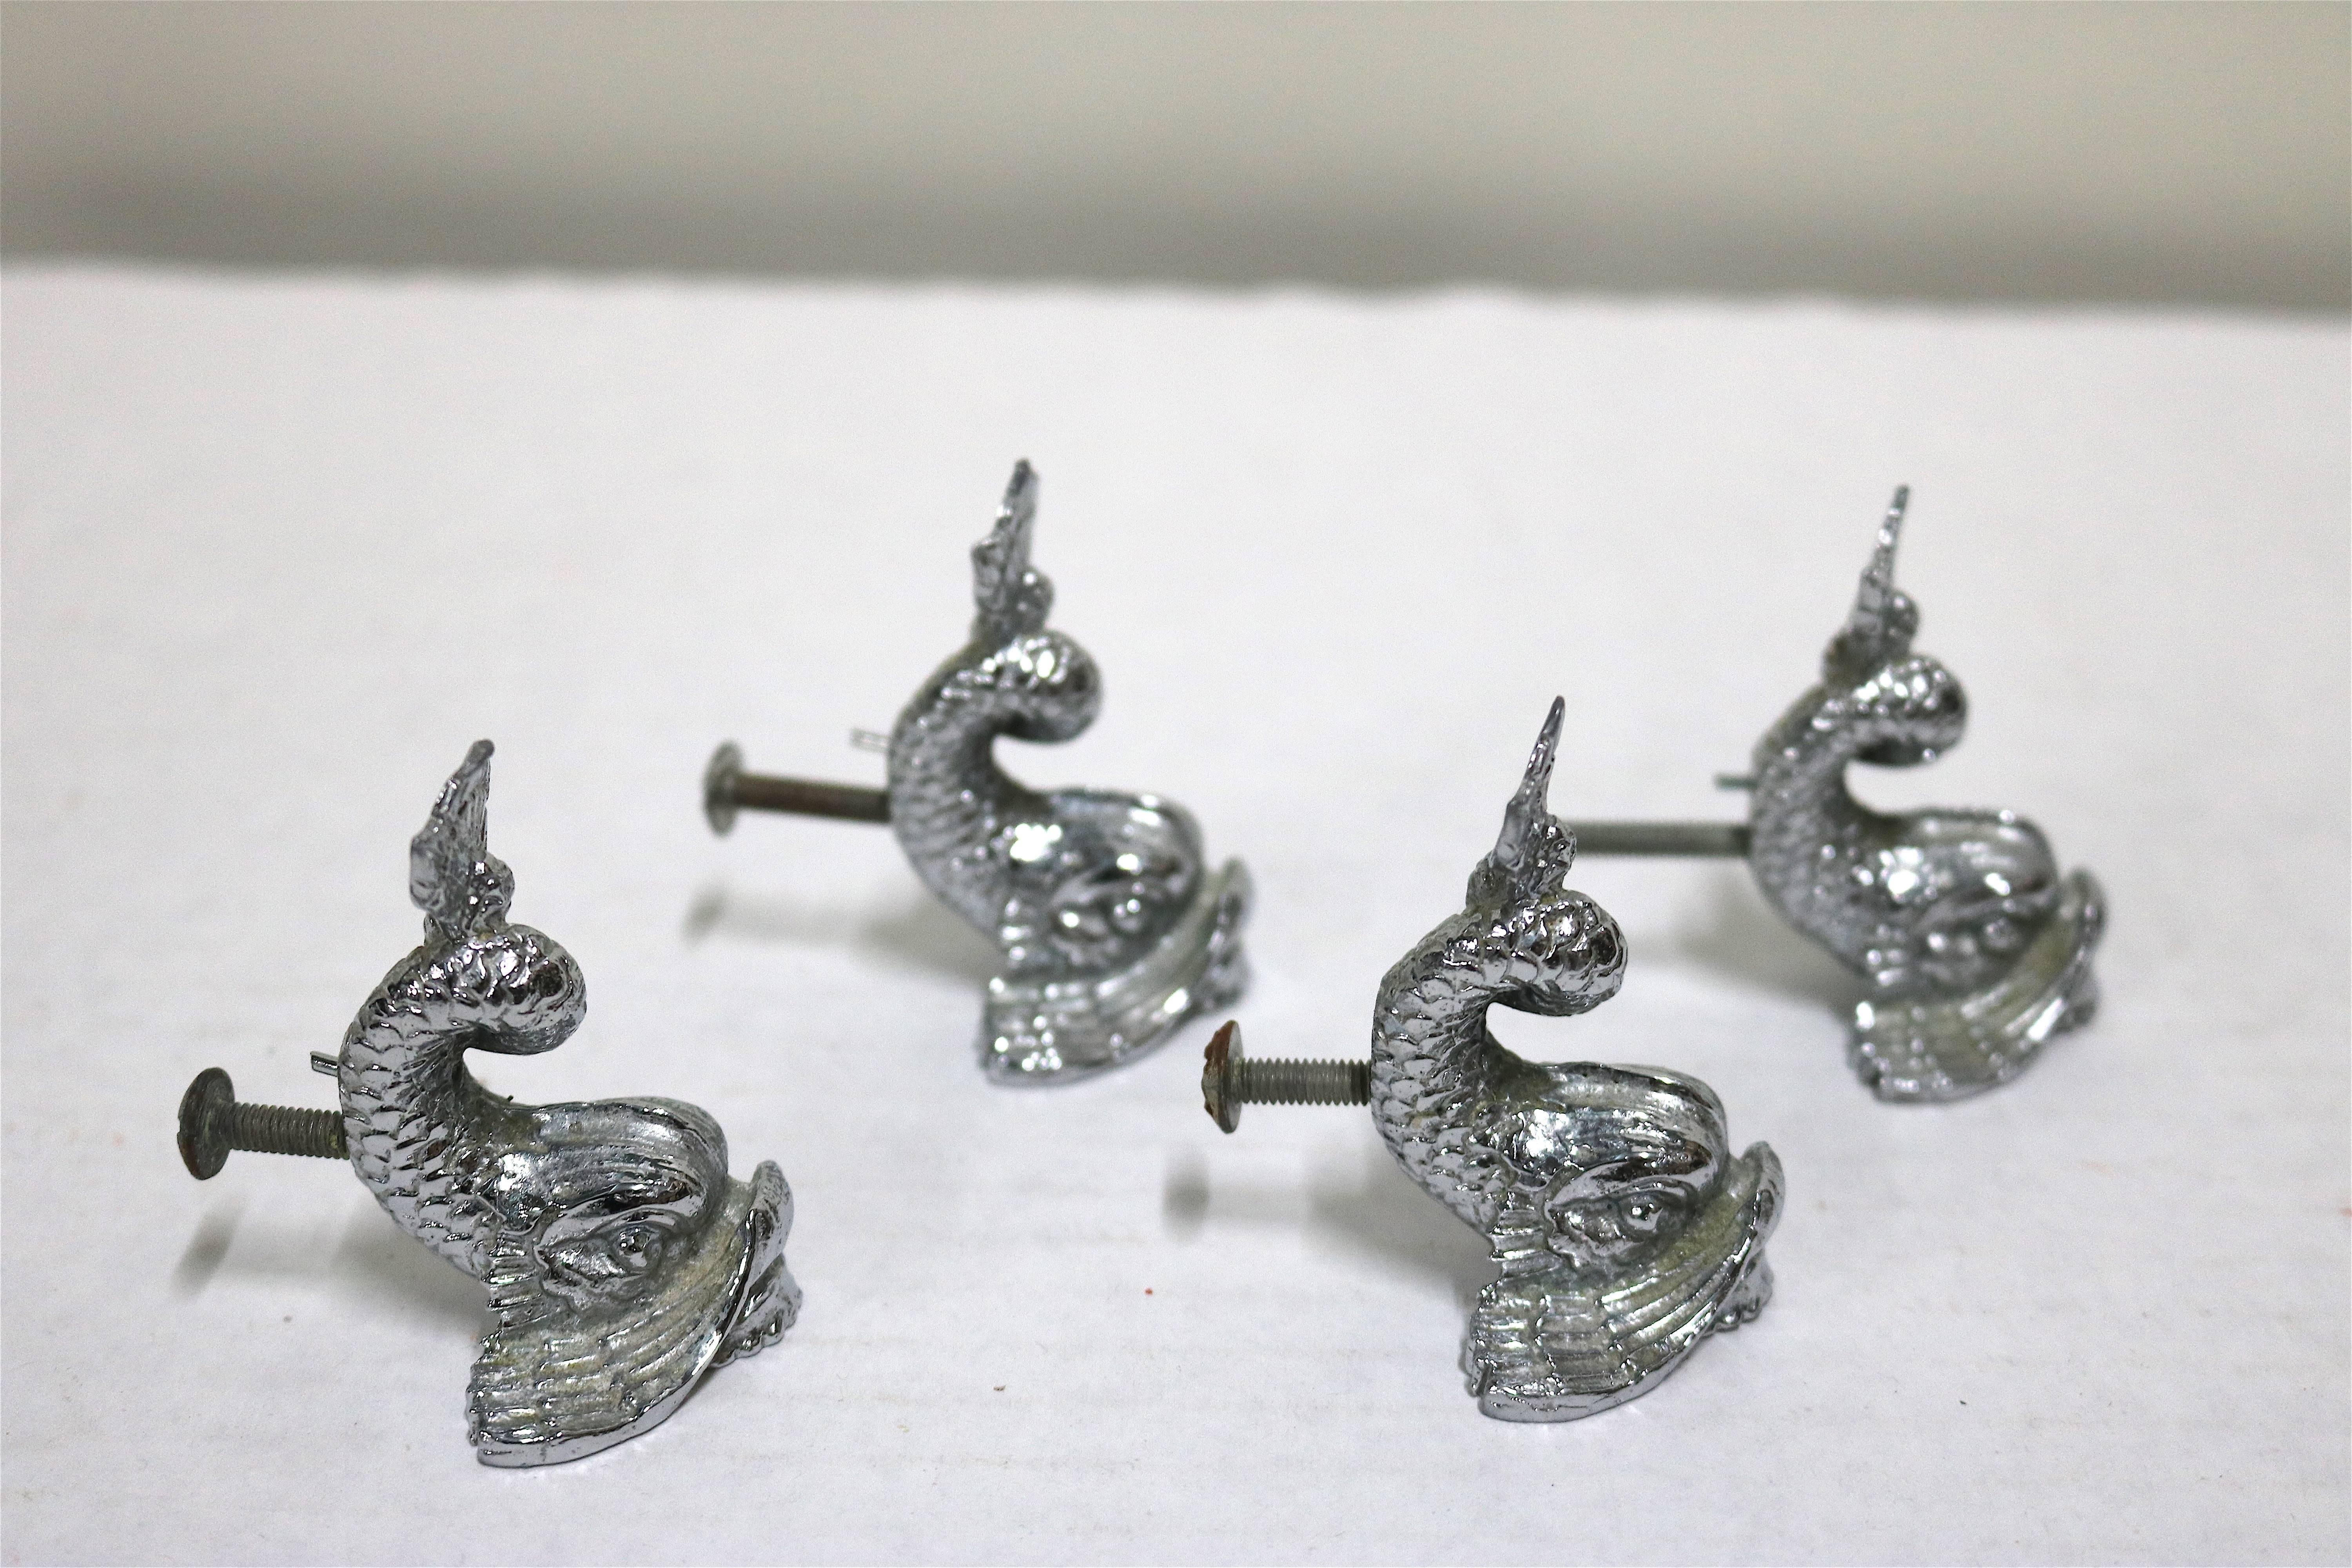 Elegant Sherle Wagner Vintage Dolphin Faucet Set in Silver Finish In Good Condition For Sale In West Palm Beach, FL